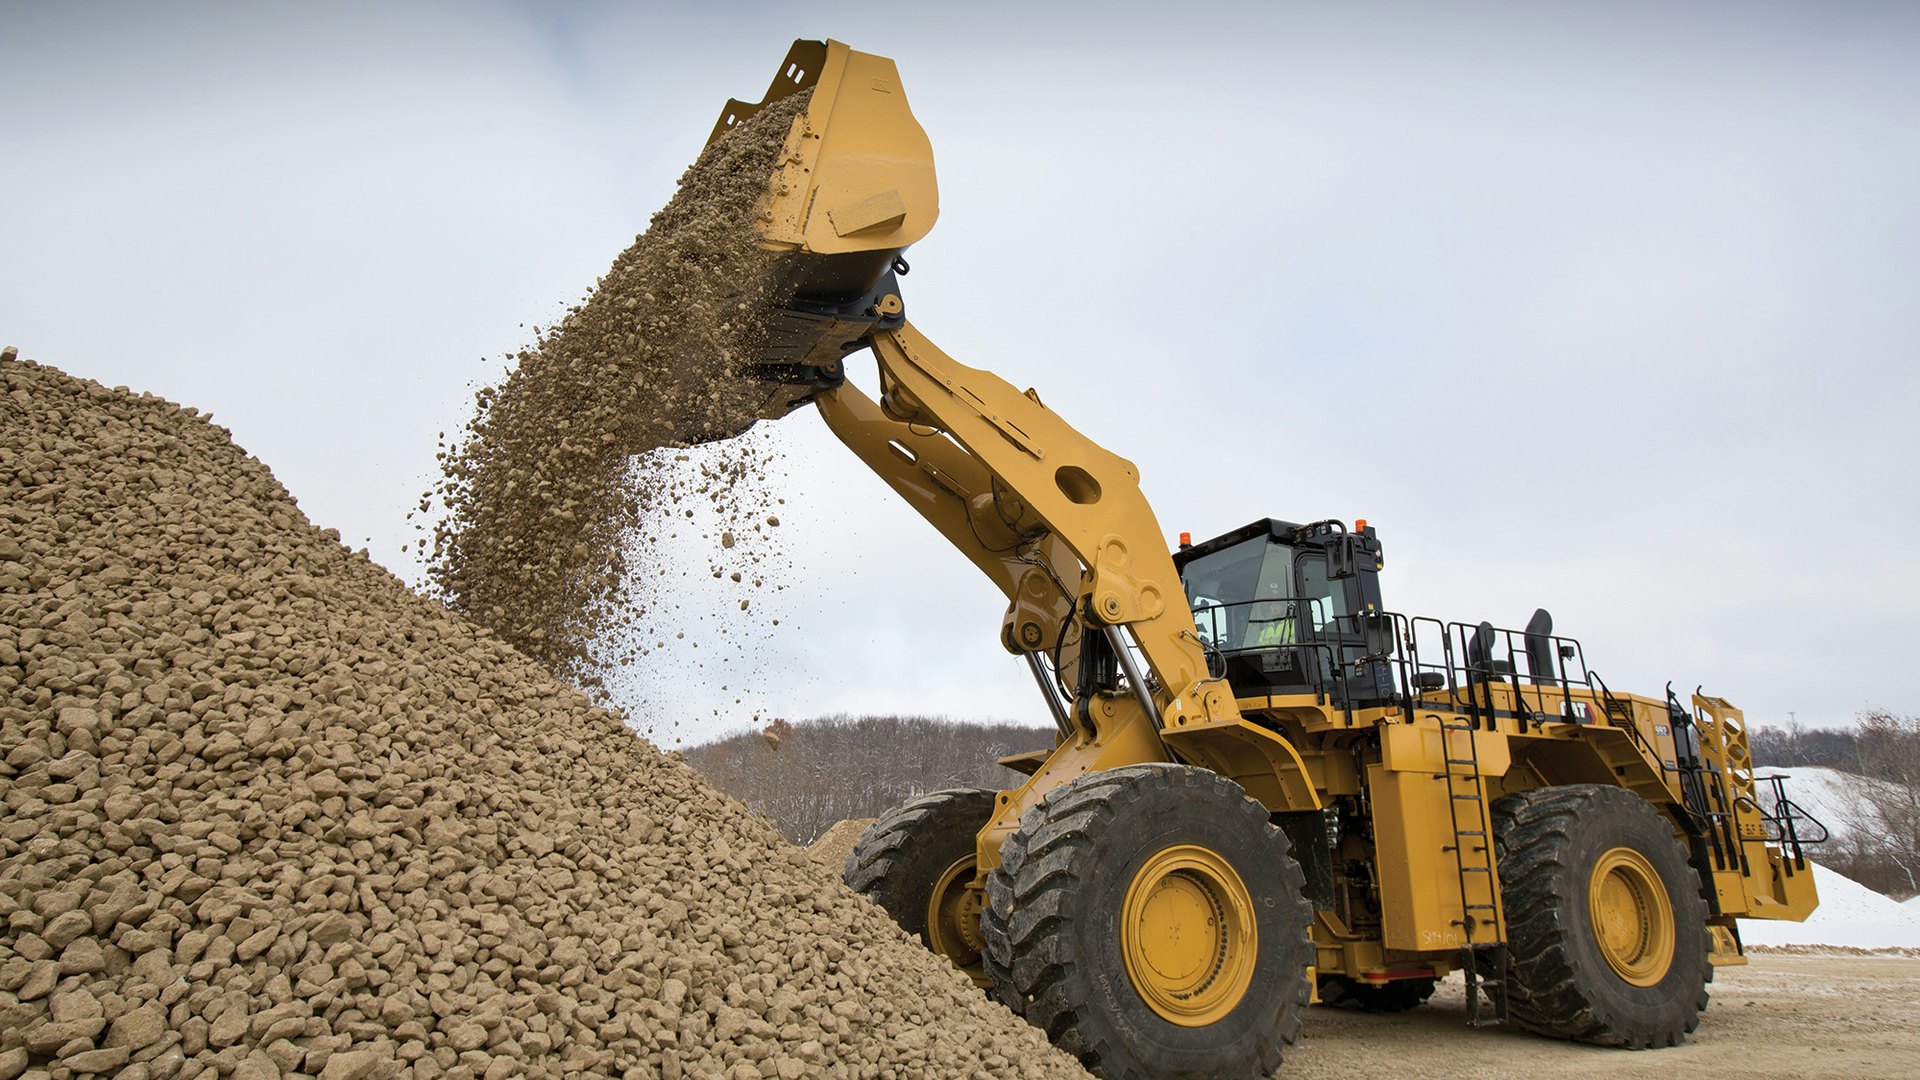 New Cat 992 Wheel Loader is 32% More Productive in Mining Applications | OEM Off-Highway